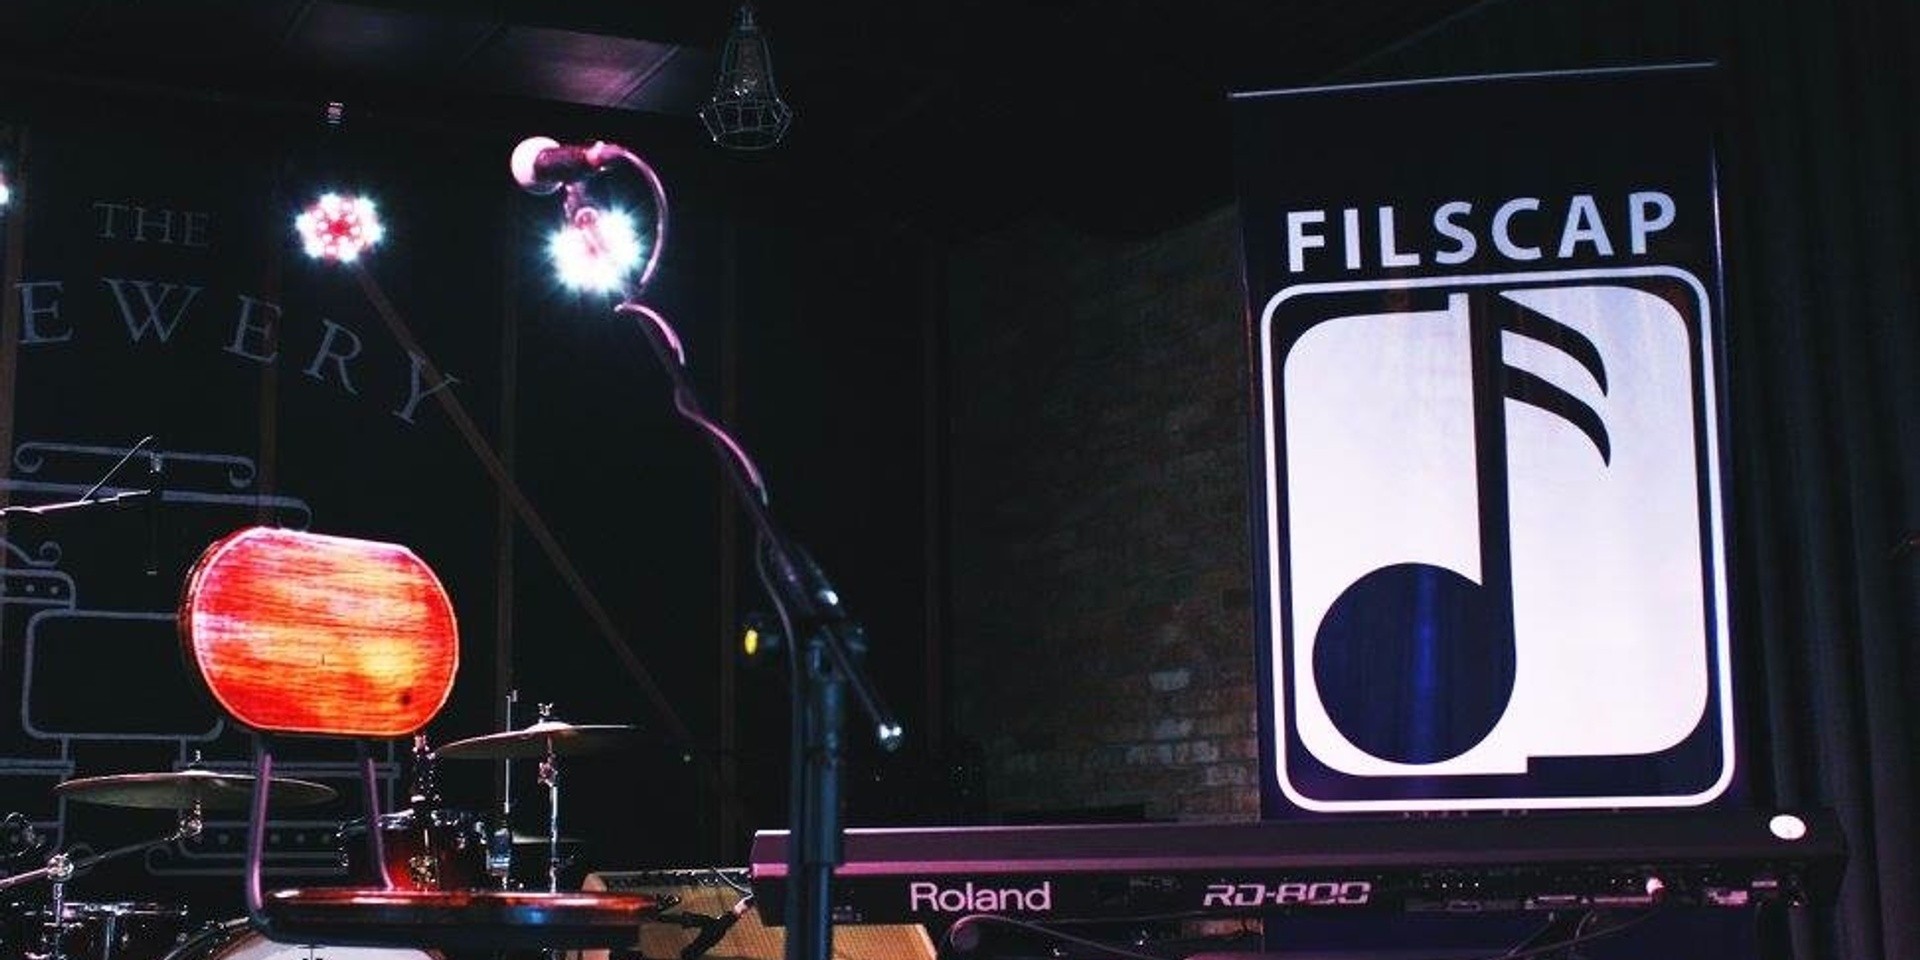 FILSCAP invites songwriters to bring their original music to open mic night at 12 Monkeys